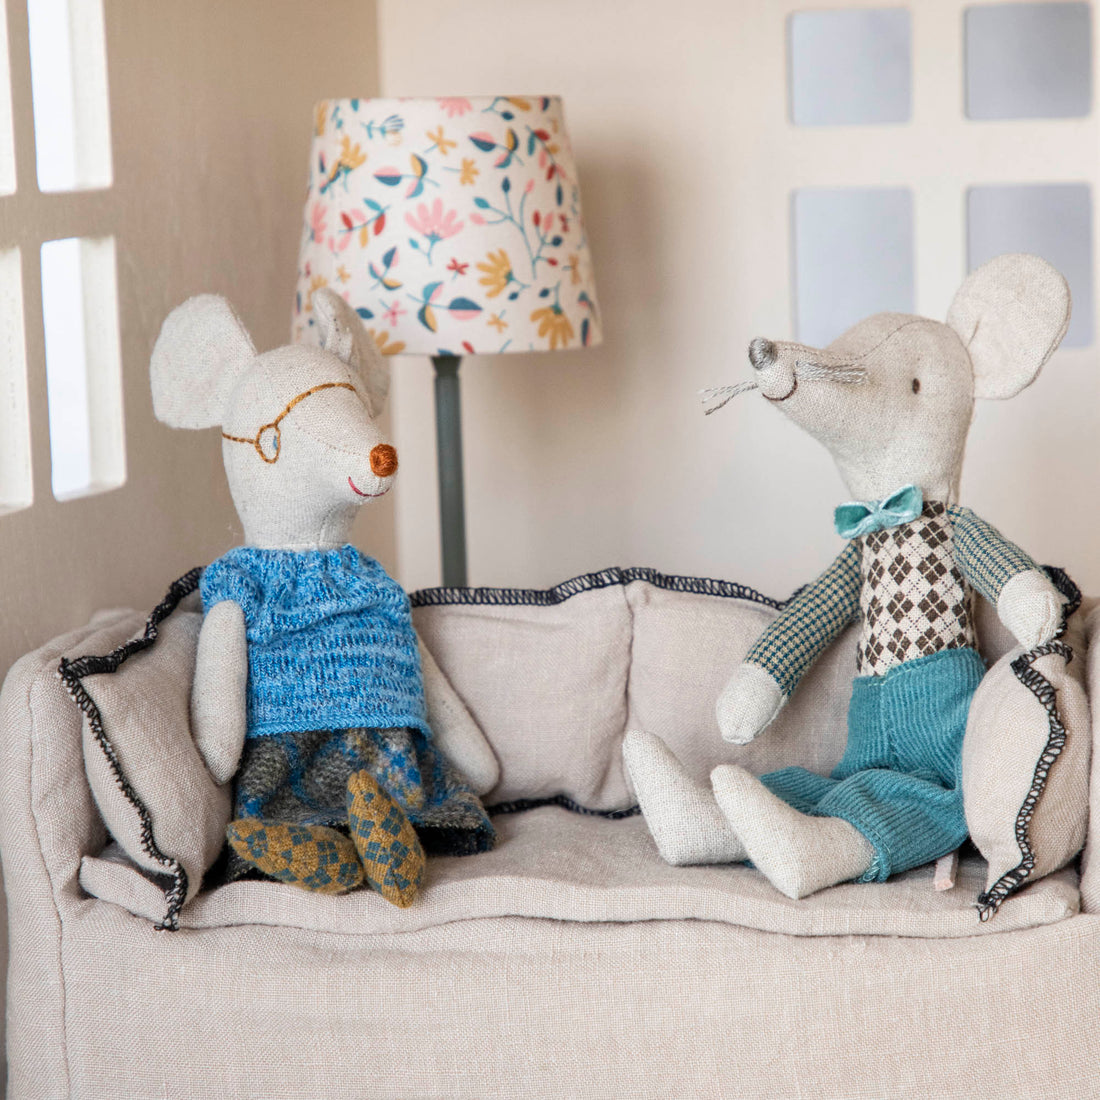 Two plush Maileg mouse toys, resembling Grandma and Grandpa Mice, seated on a miniature couch beside a small lamp.